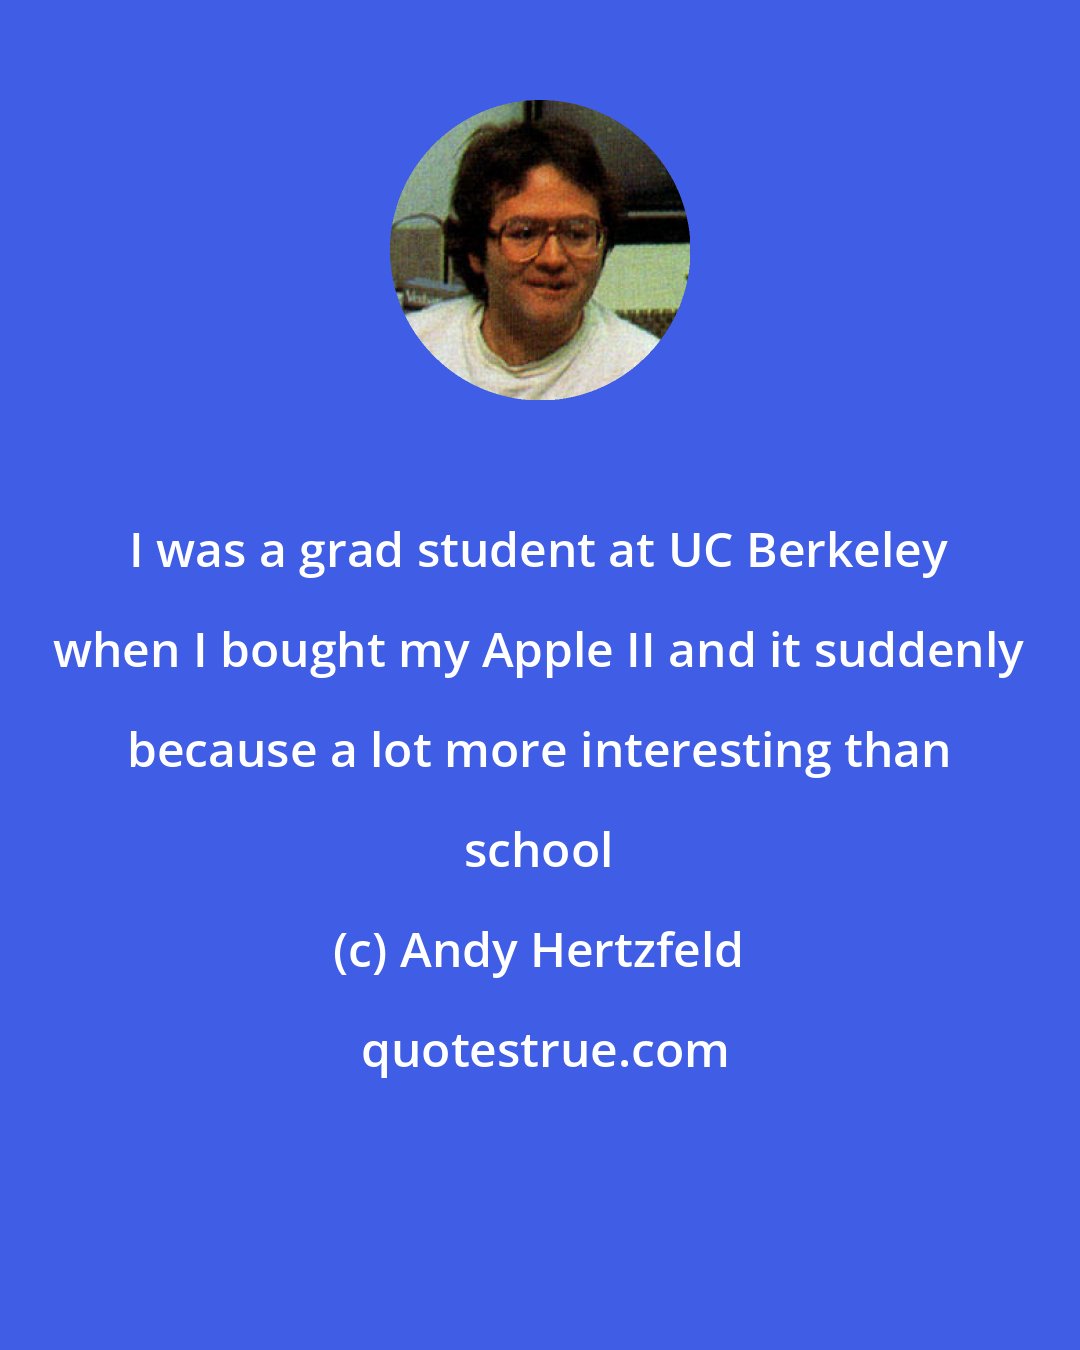 Andy Hertzfeld: I was a grad student at UC Berkeley when I bought my Apple II and it suddenly because a lot more interesting than school